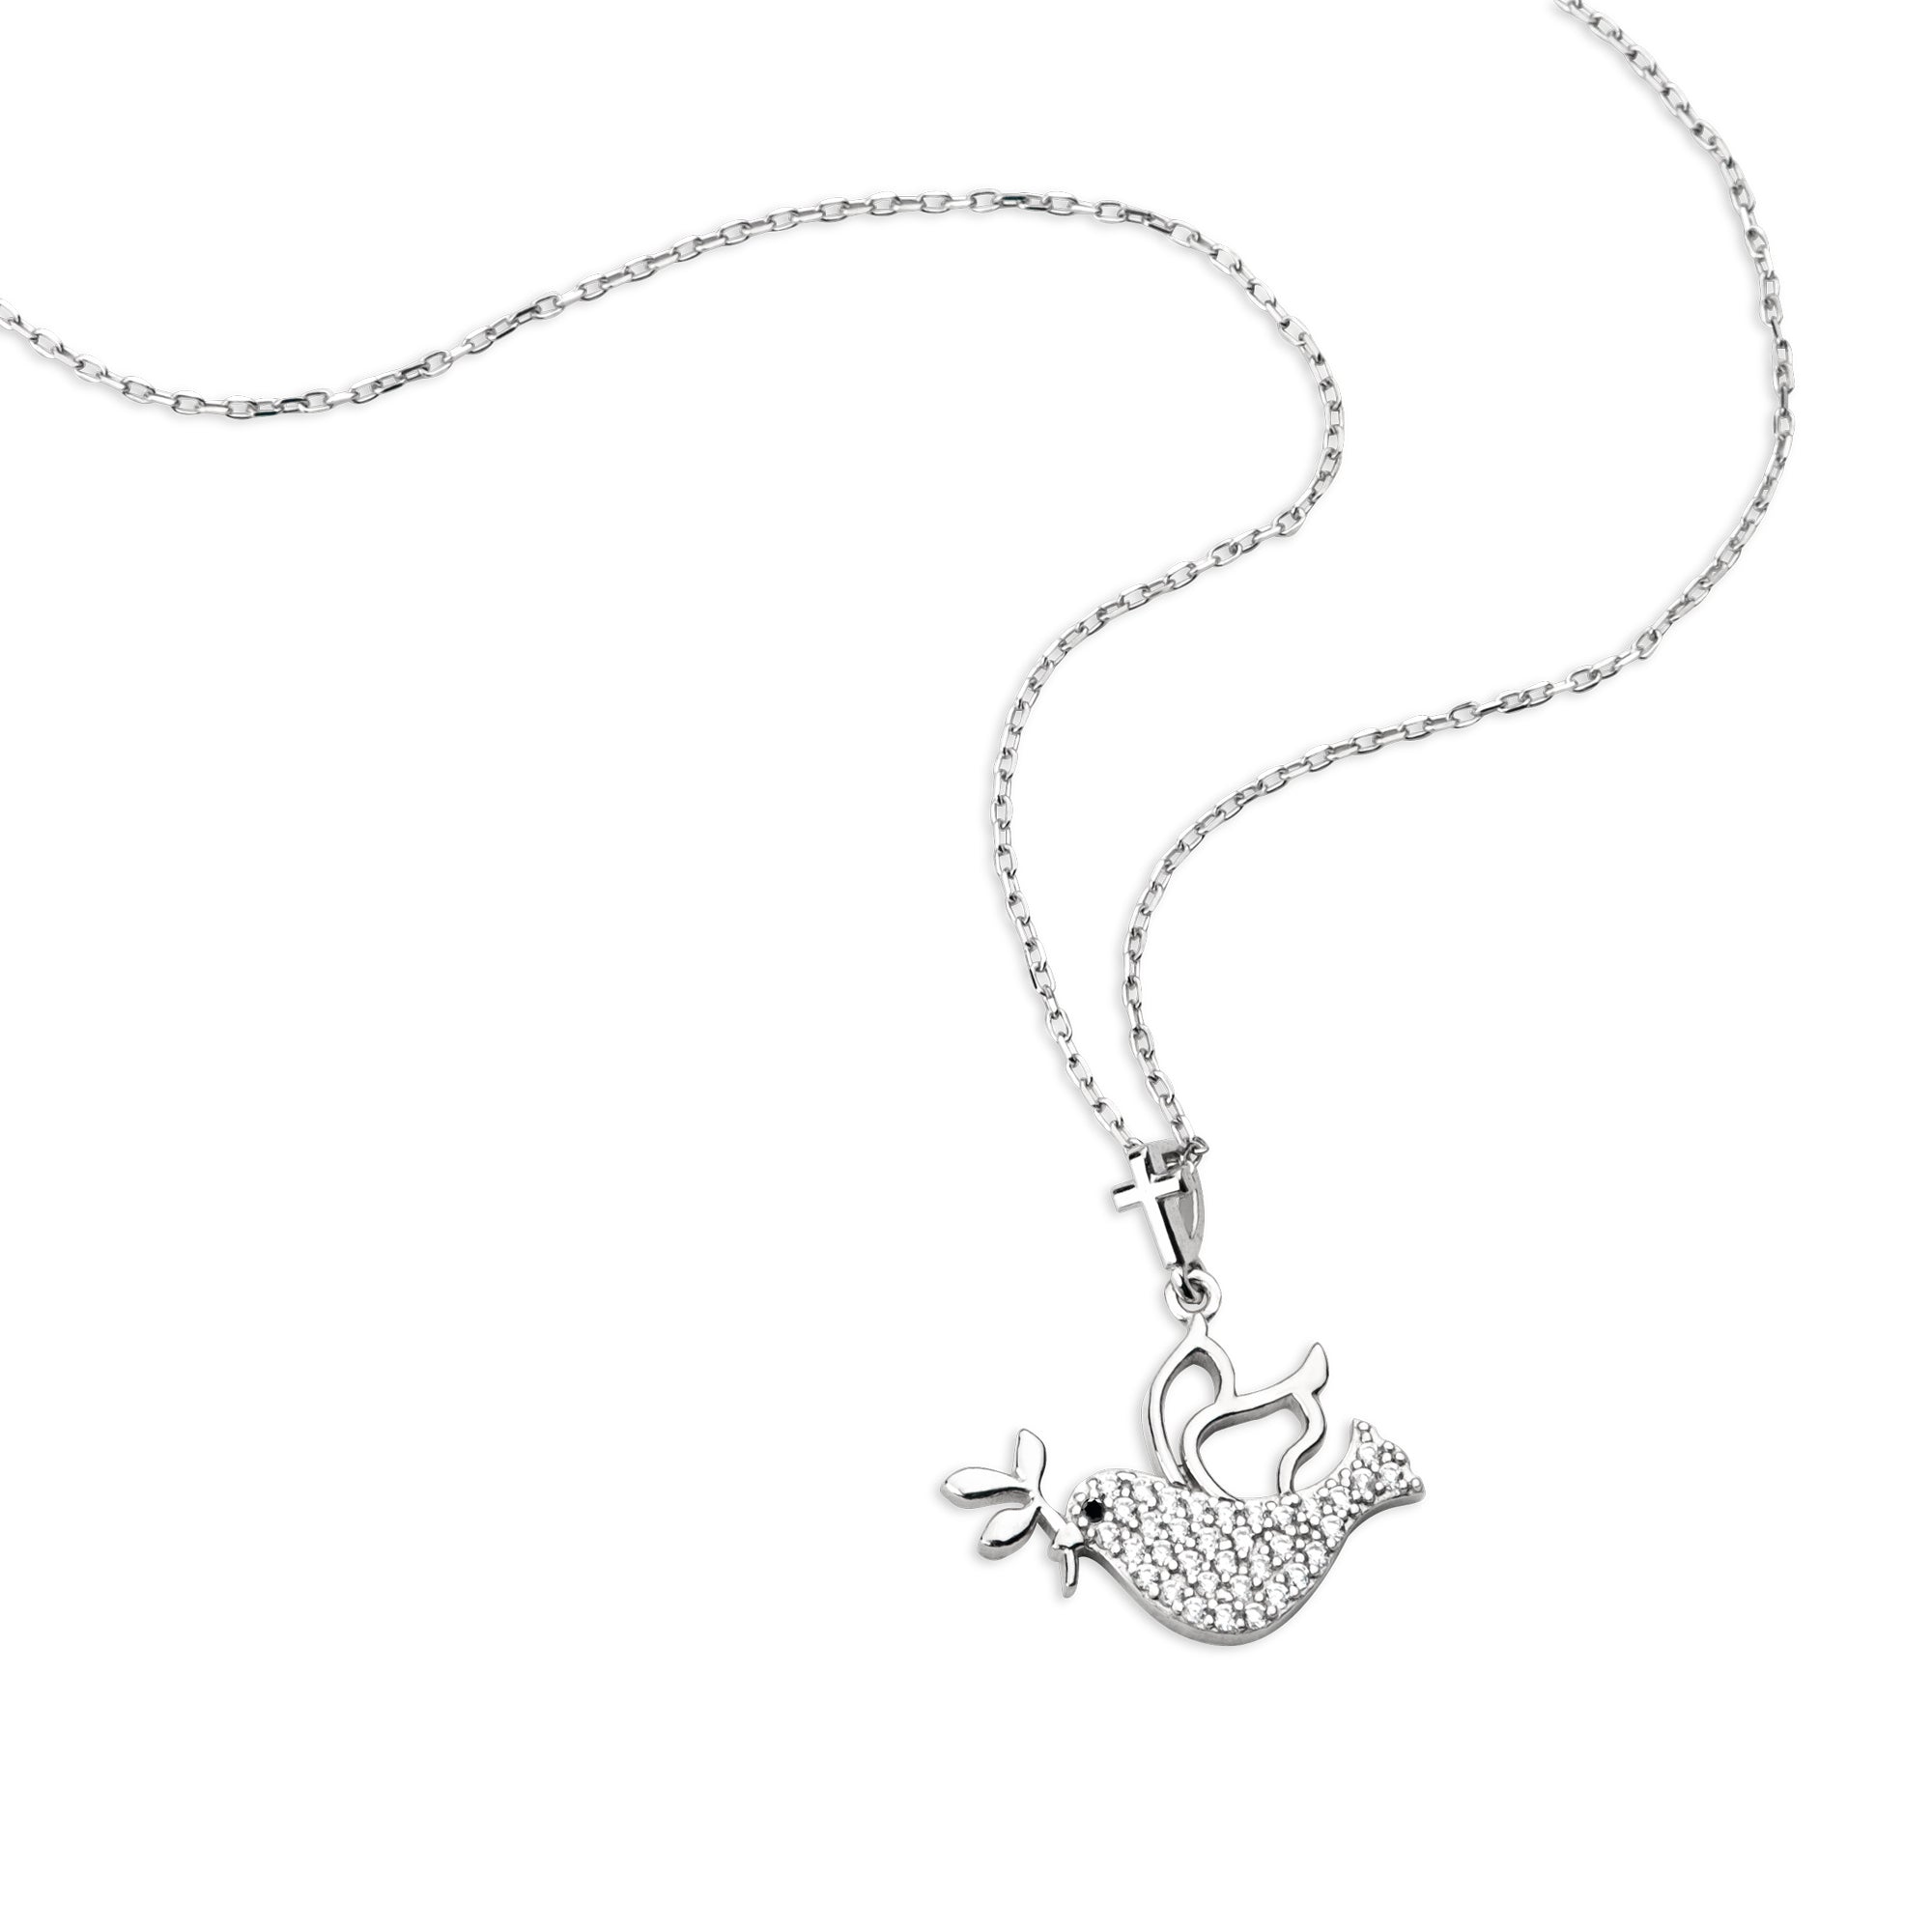 Dove Carrying Olive Branch with CZ Accents